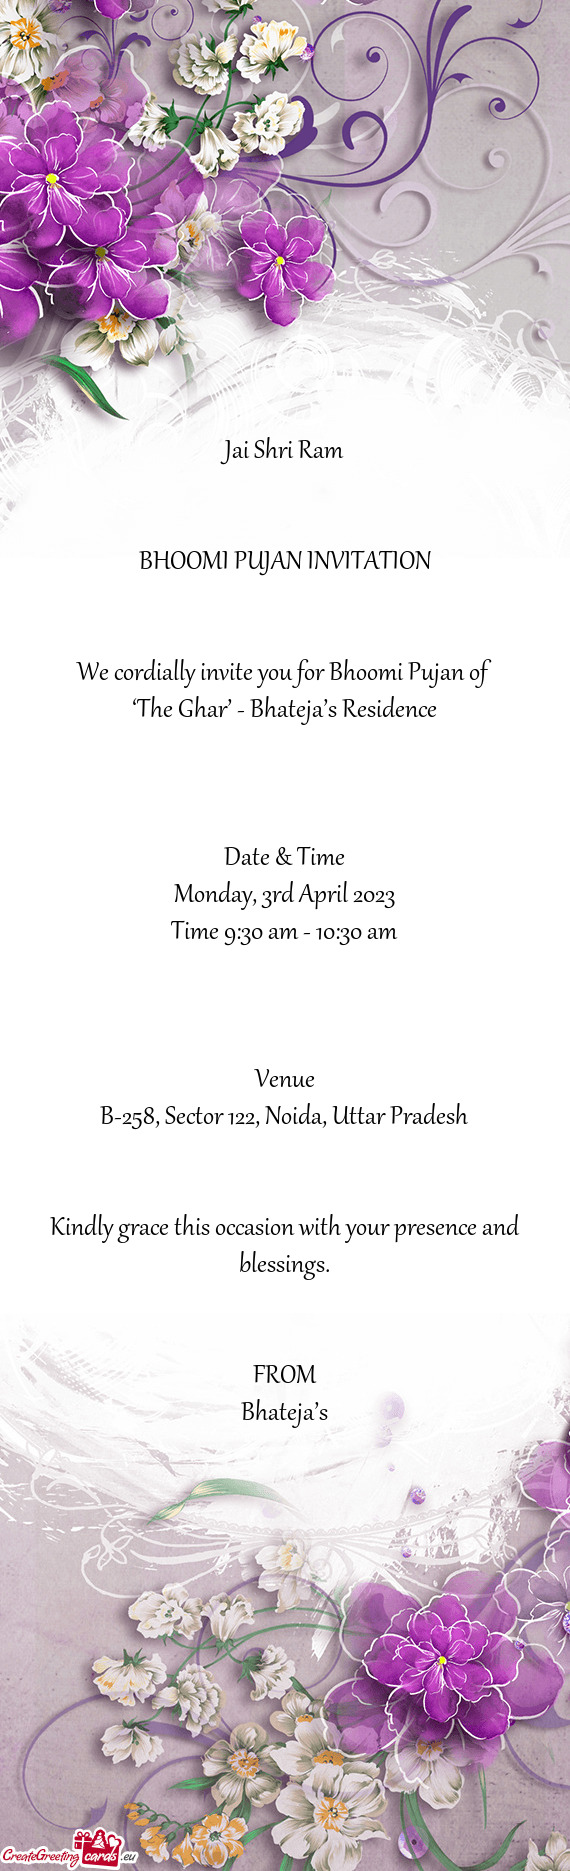 We cordially invite you for Bhoomi Pujan of